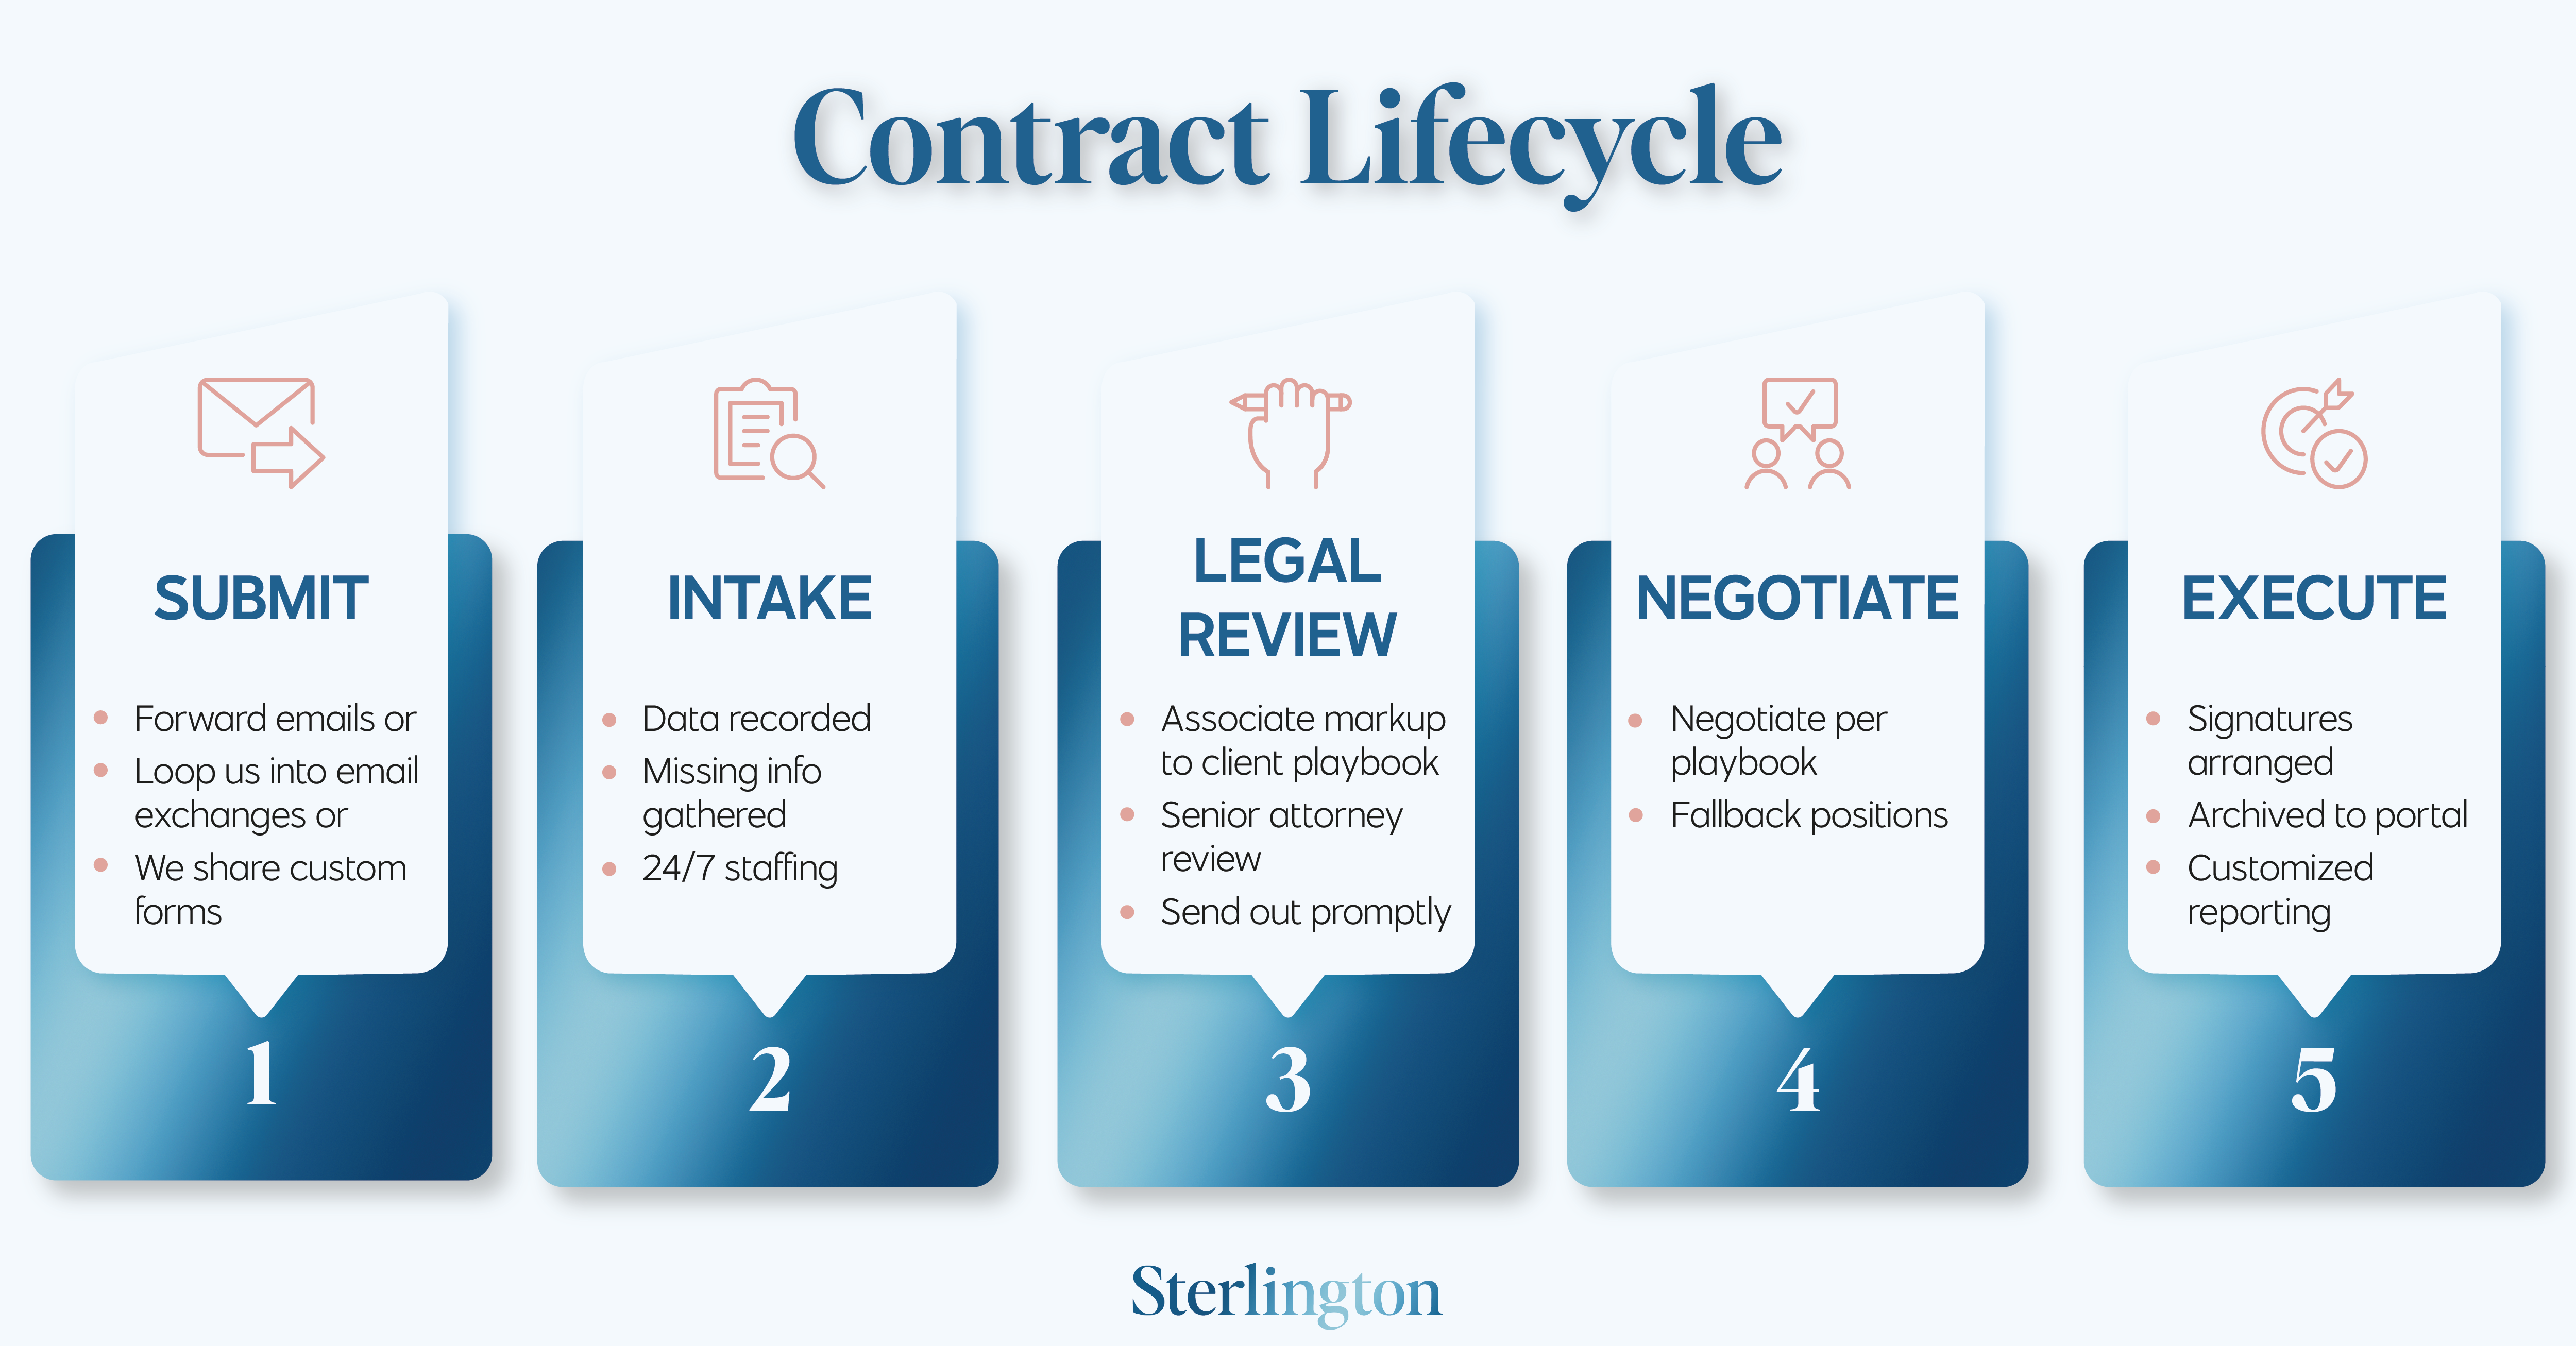 Our contract lifecycle